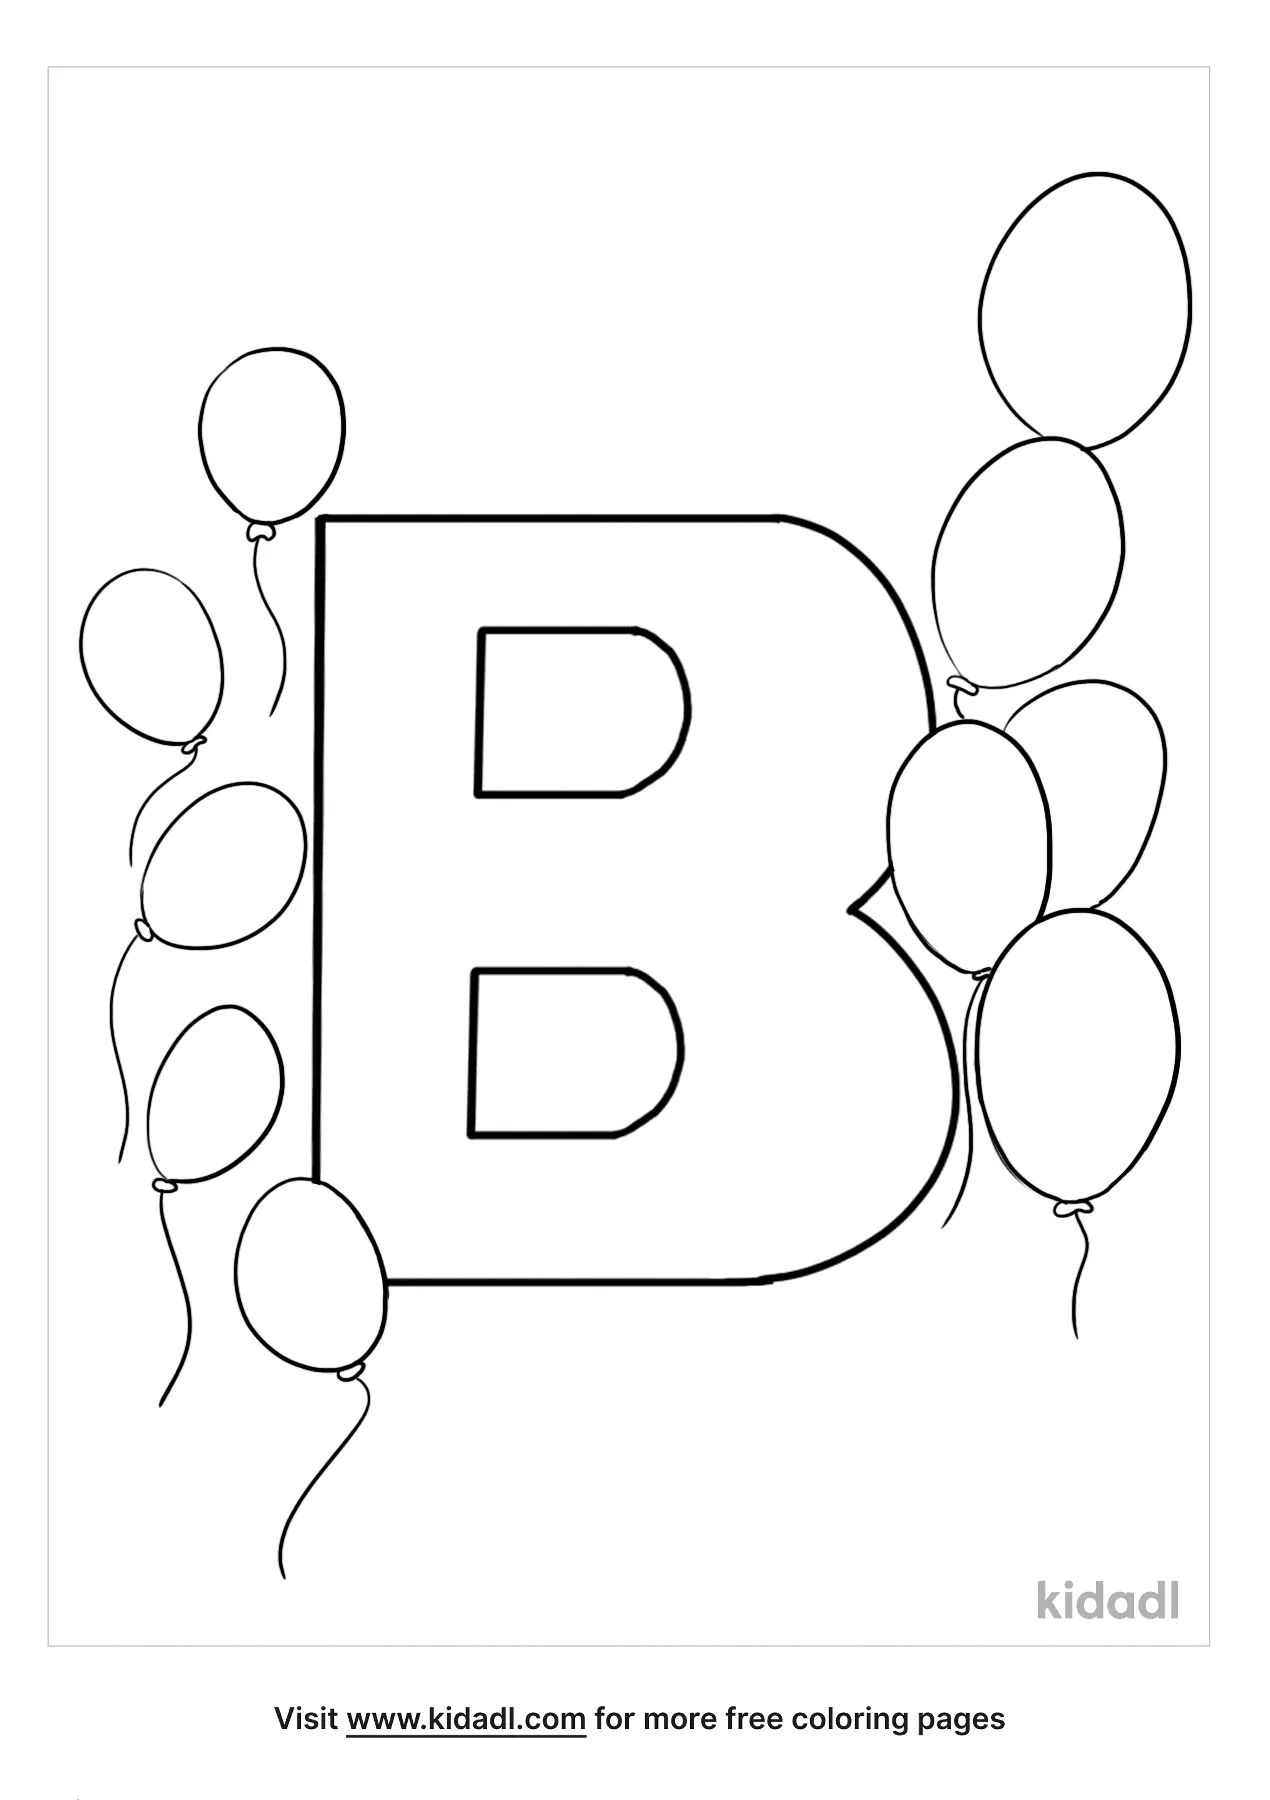 letter-b-coloring-pages-activities